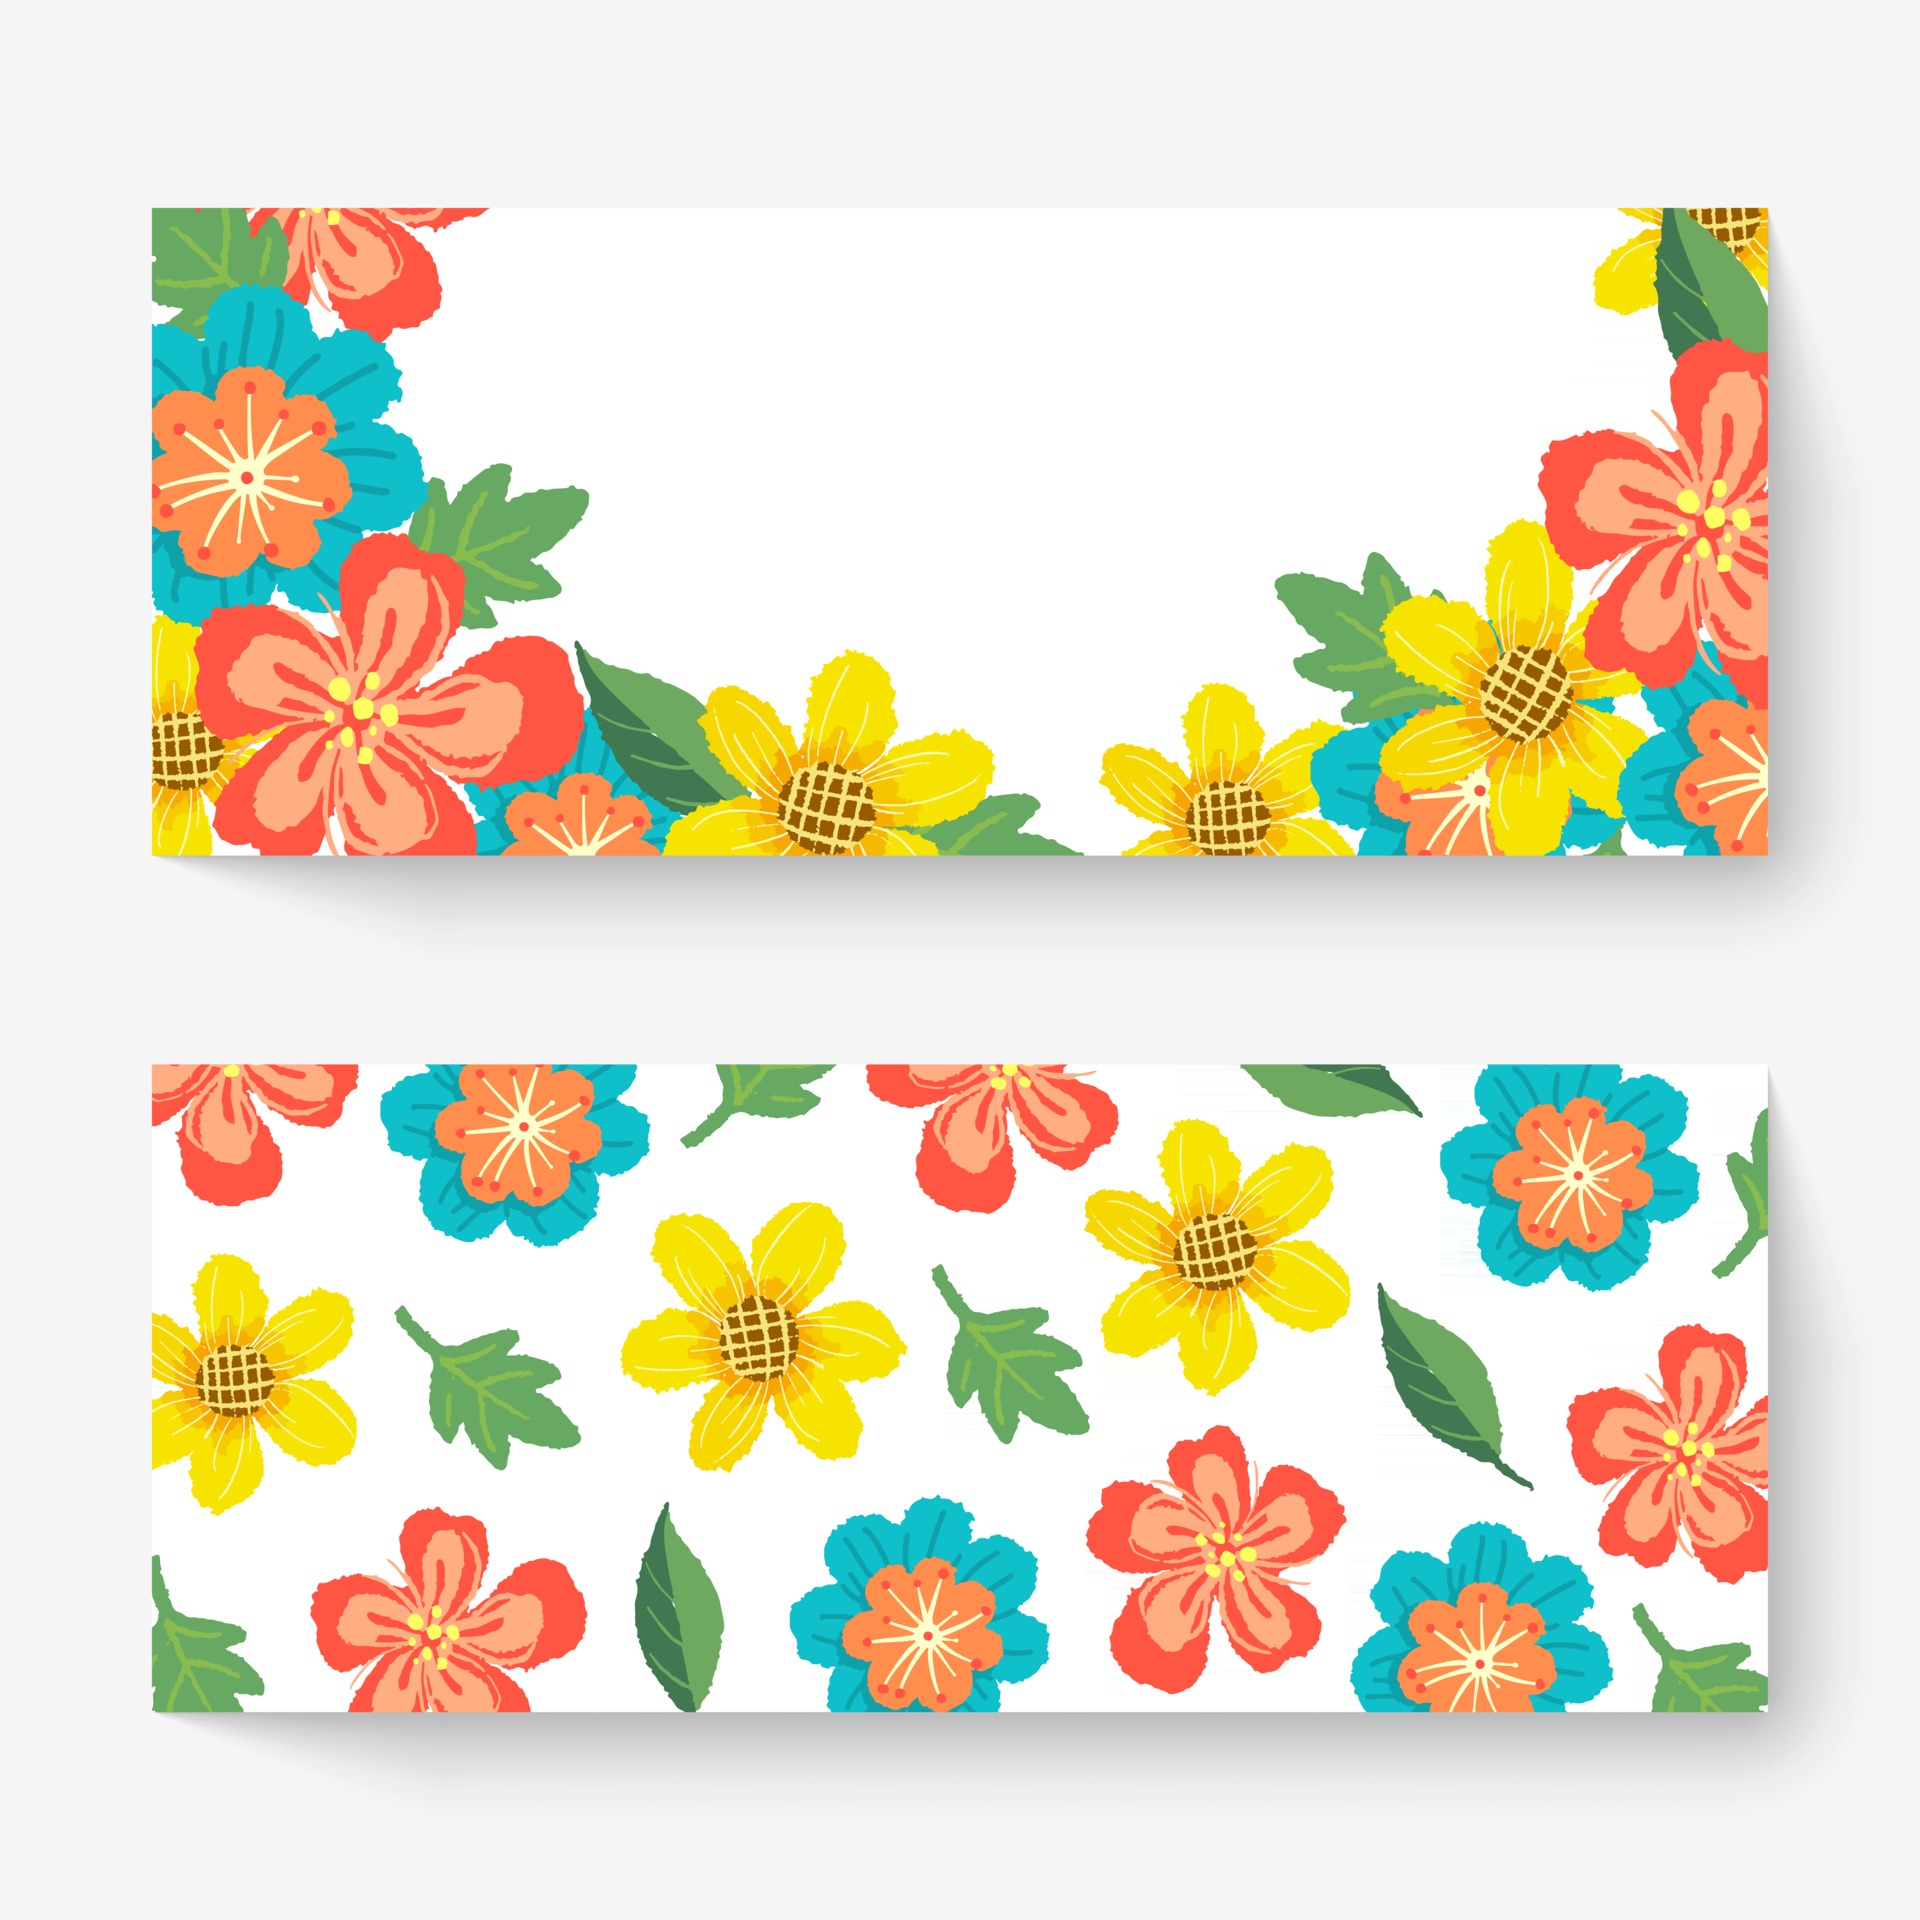 Spring floral banner with colorful flowers. Can be use for voucher, wallpaper, flyers, invitation, posters, brochure, coupon discount